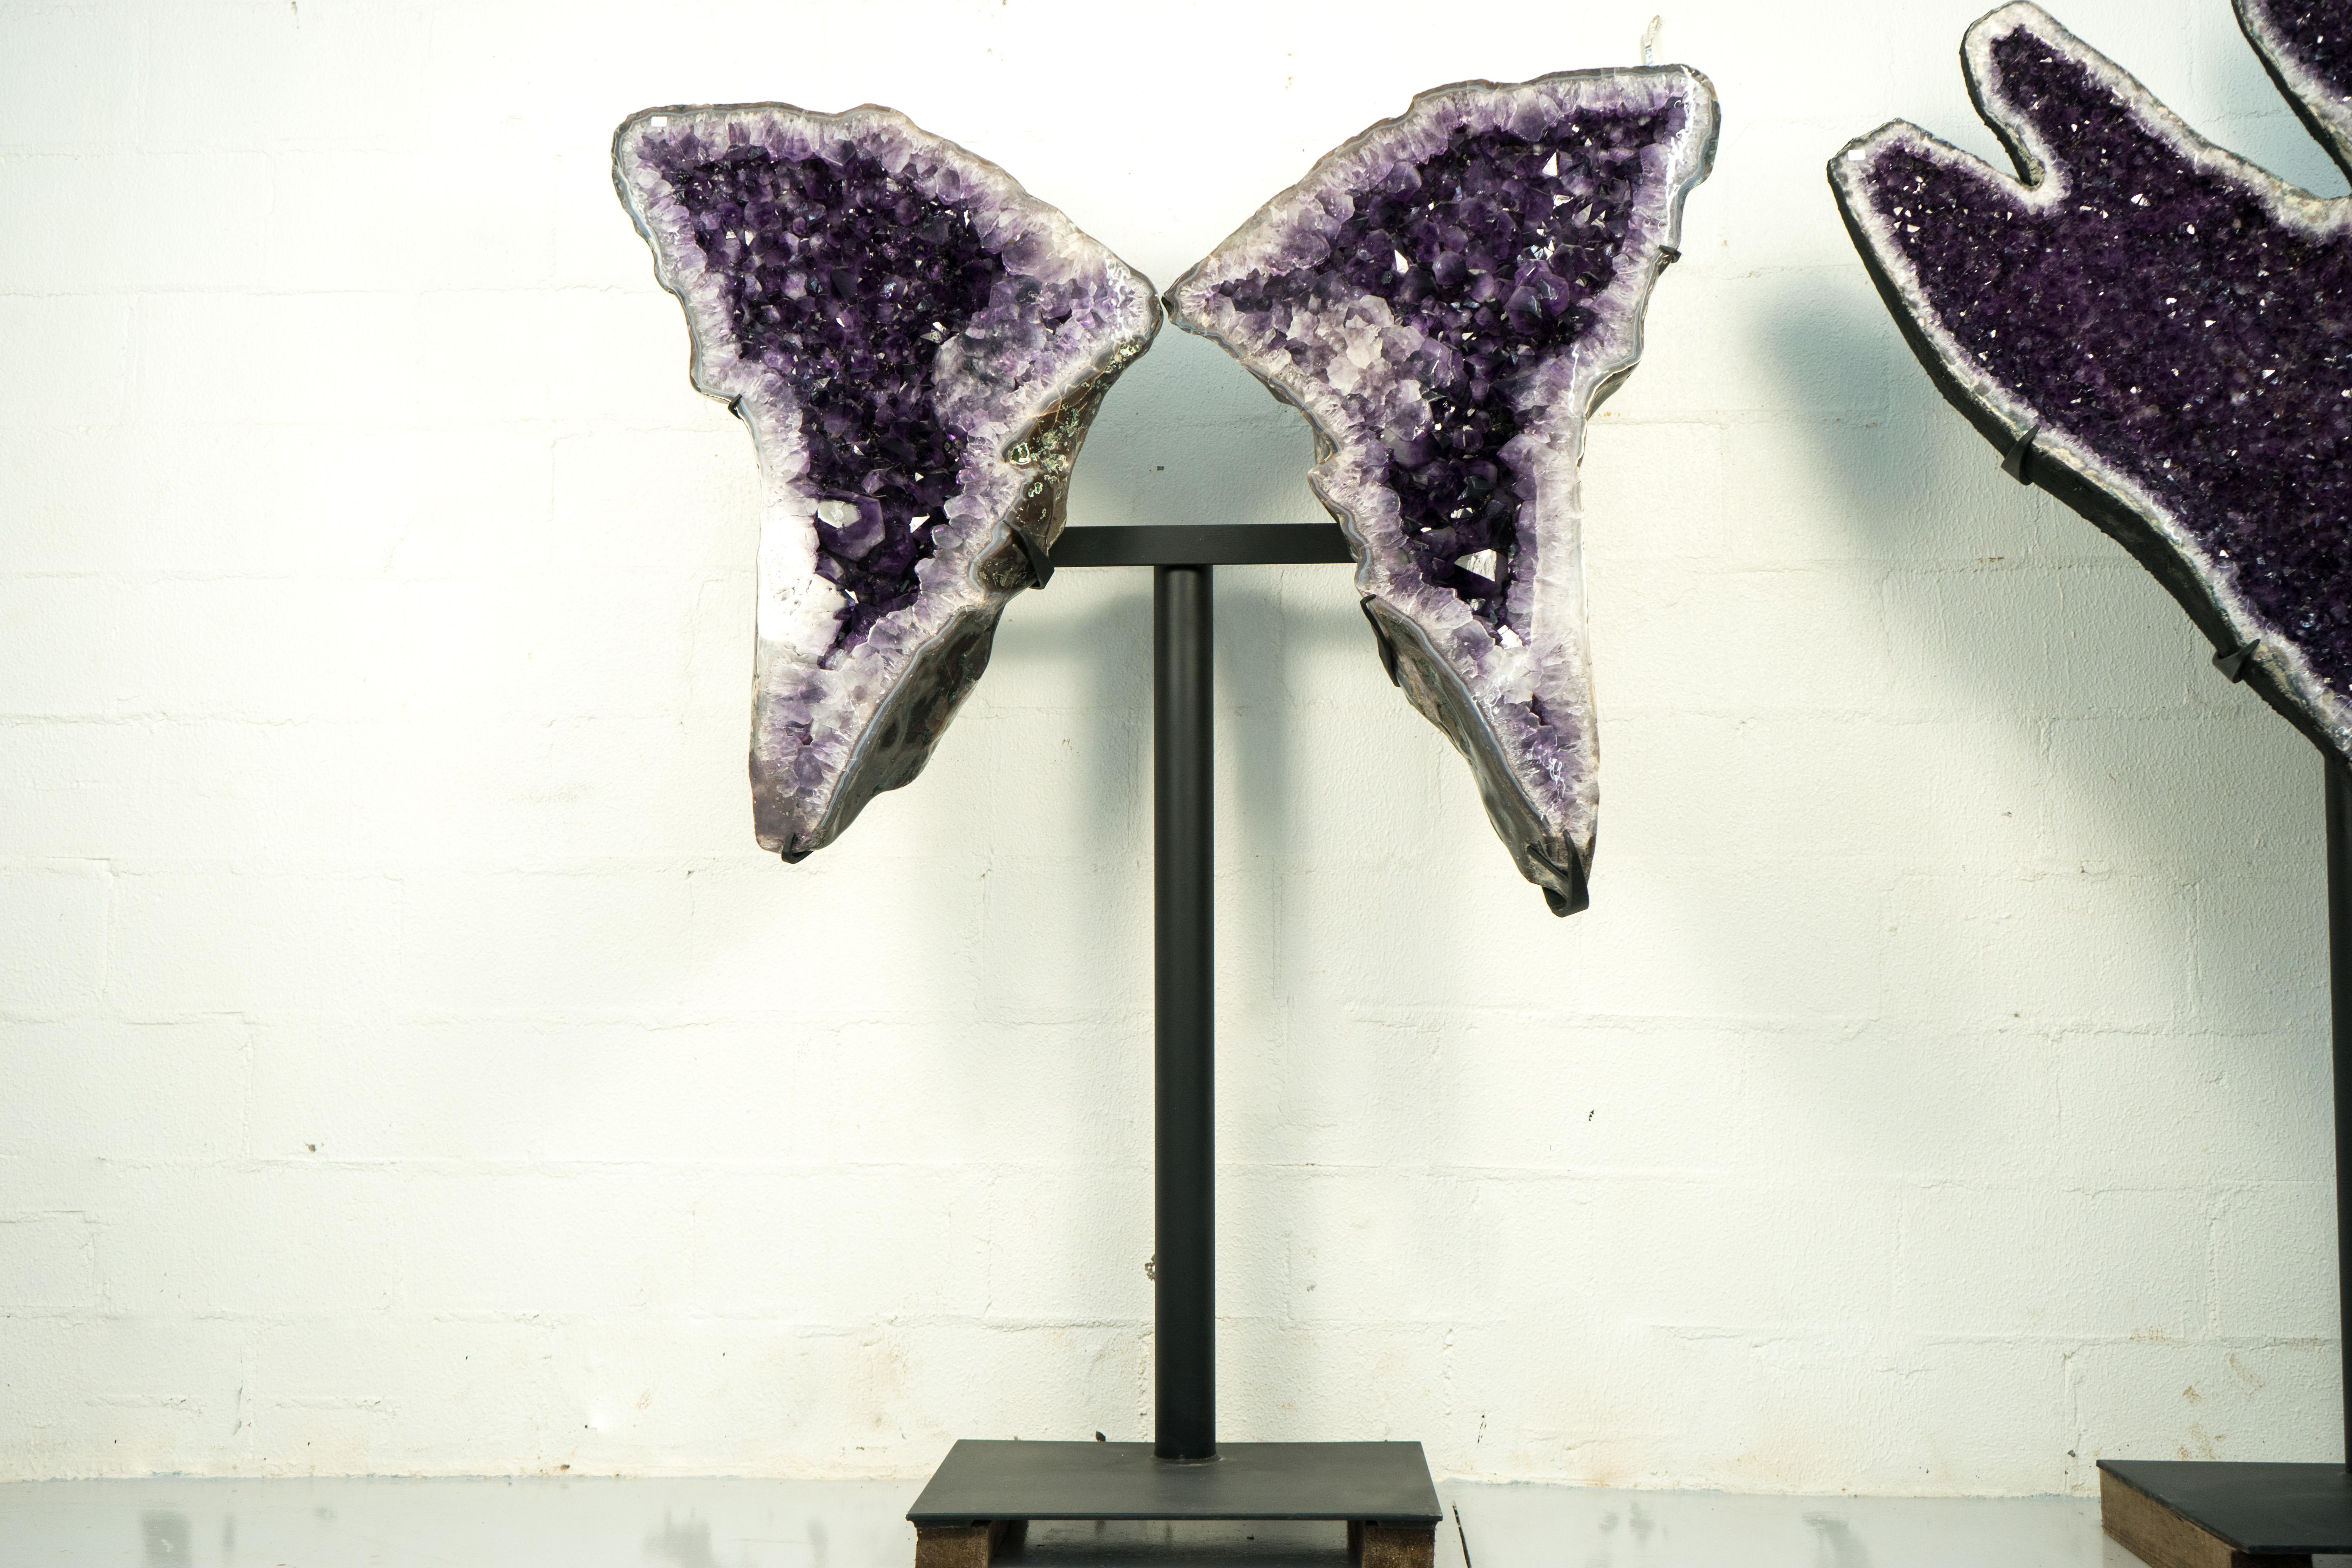 Sculptural X-Large Amethyst Butterfly Wings Geode

▫️ Description

A rare pair of Amethyst Geode Wings with sculptural presence. These majestic specimens showcase shimmering, high-grade, deep purple amethyst crystals, creating a natural treasure